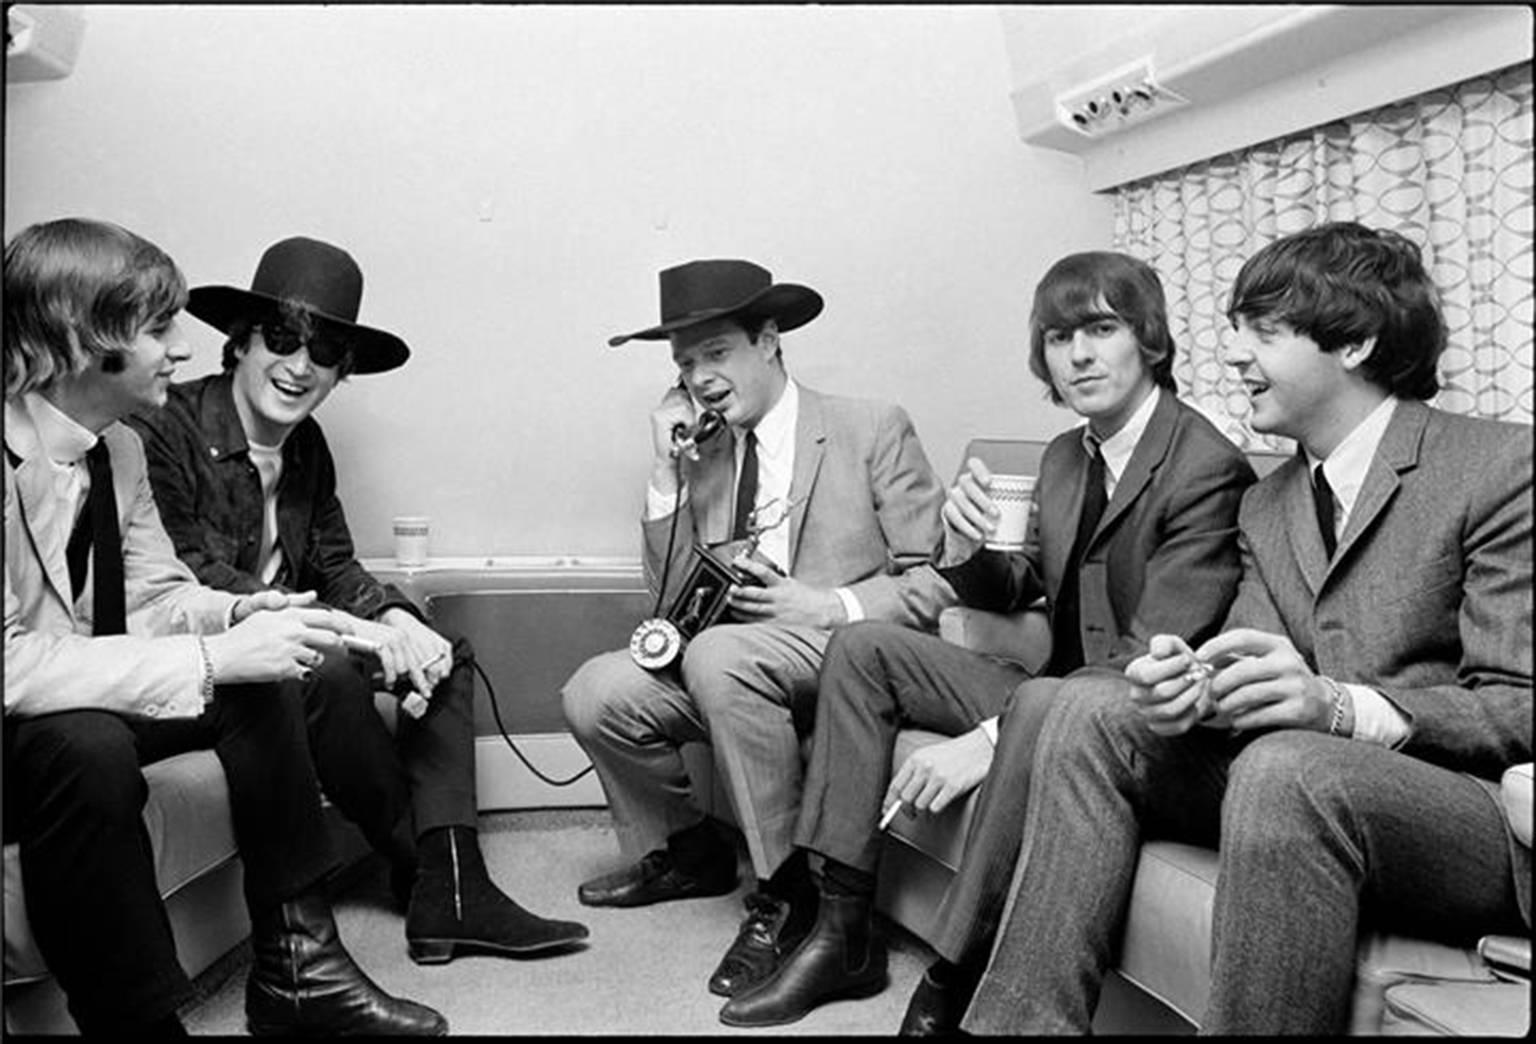 Curt Gunther Black and White Photograph - The Beatles and their Manager